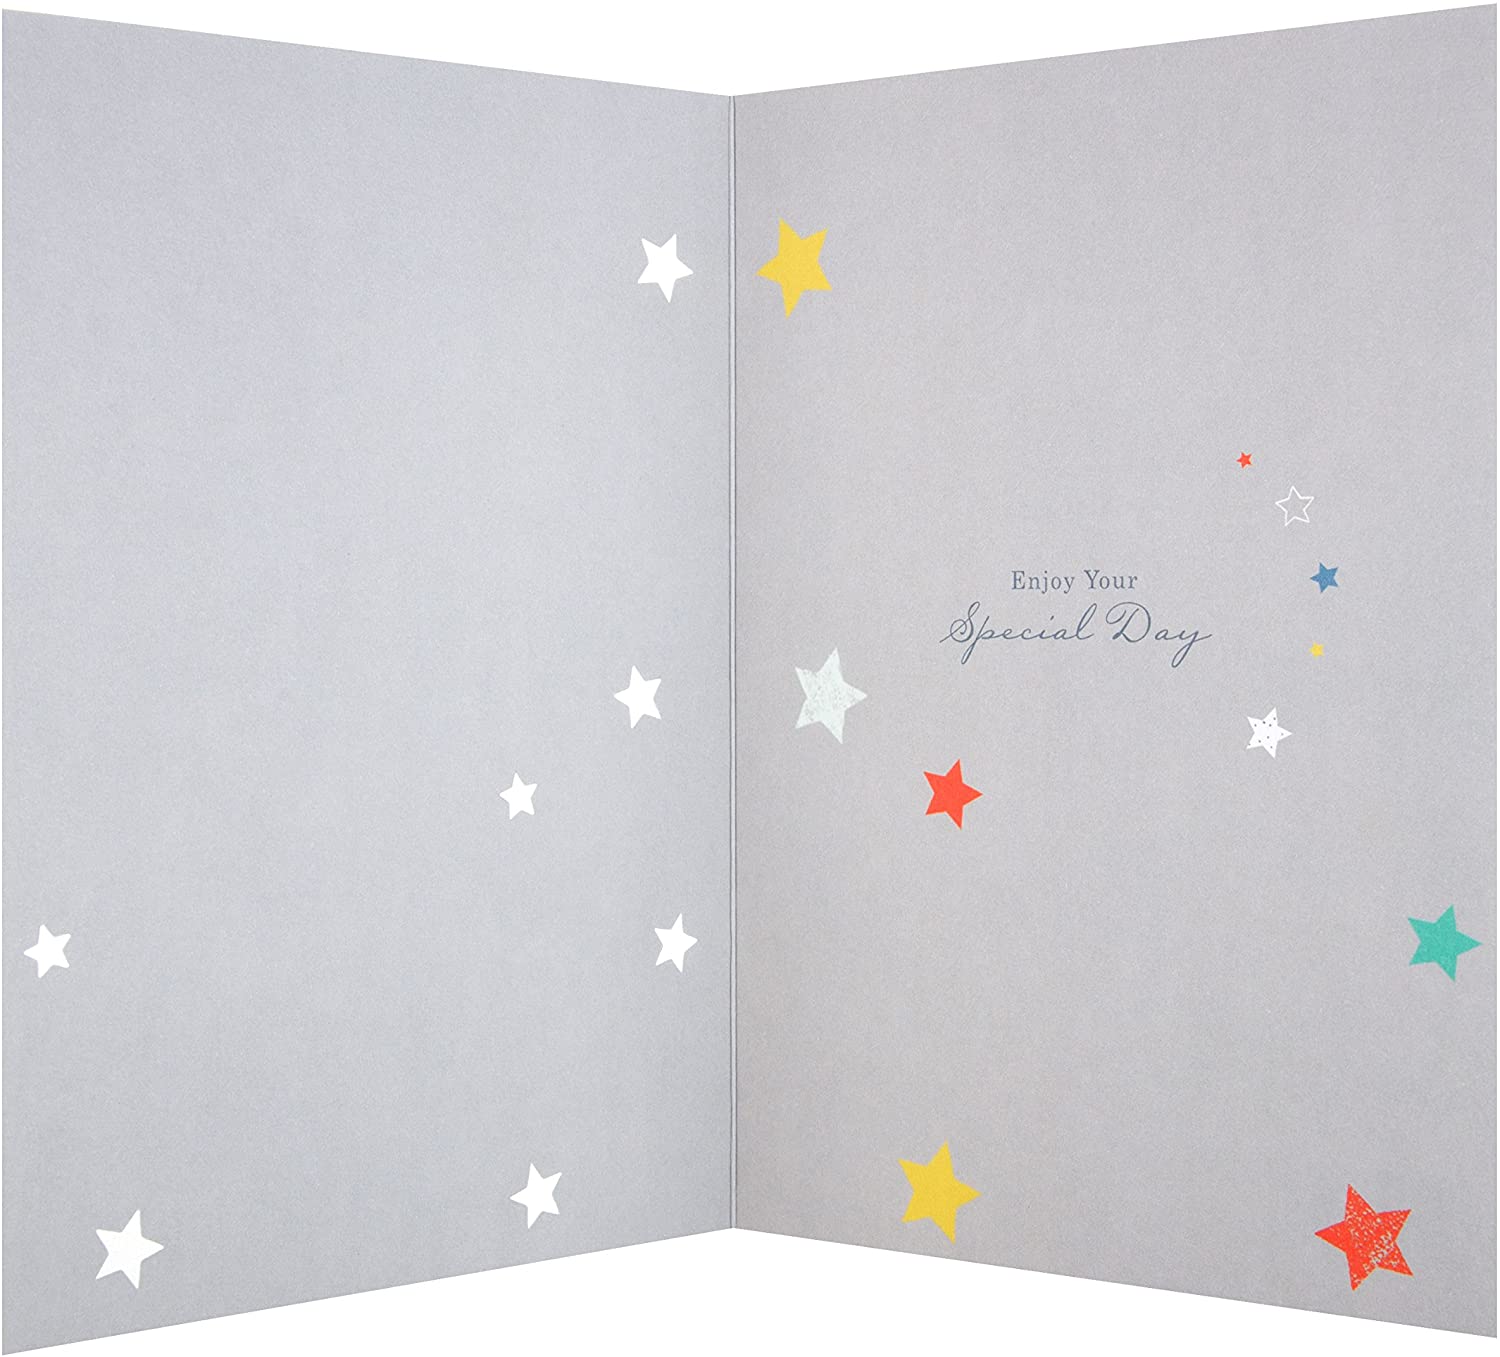 Son in law Birthday Card - Shooting Stars and Presents